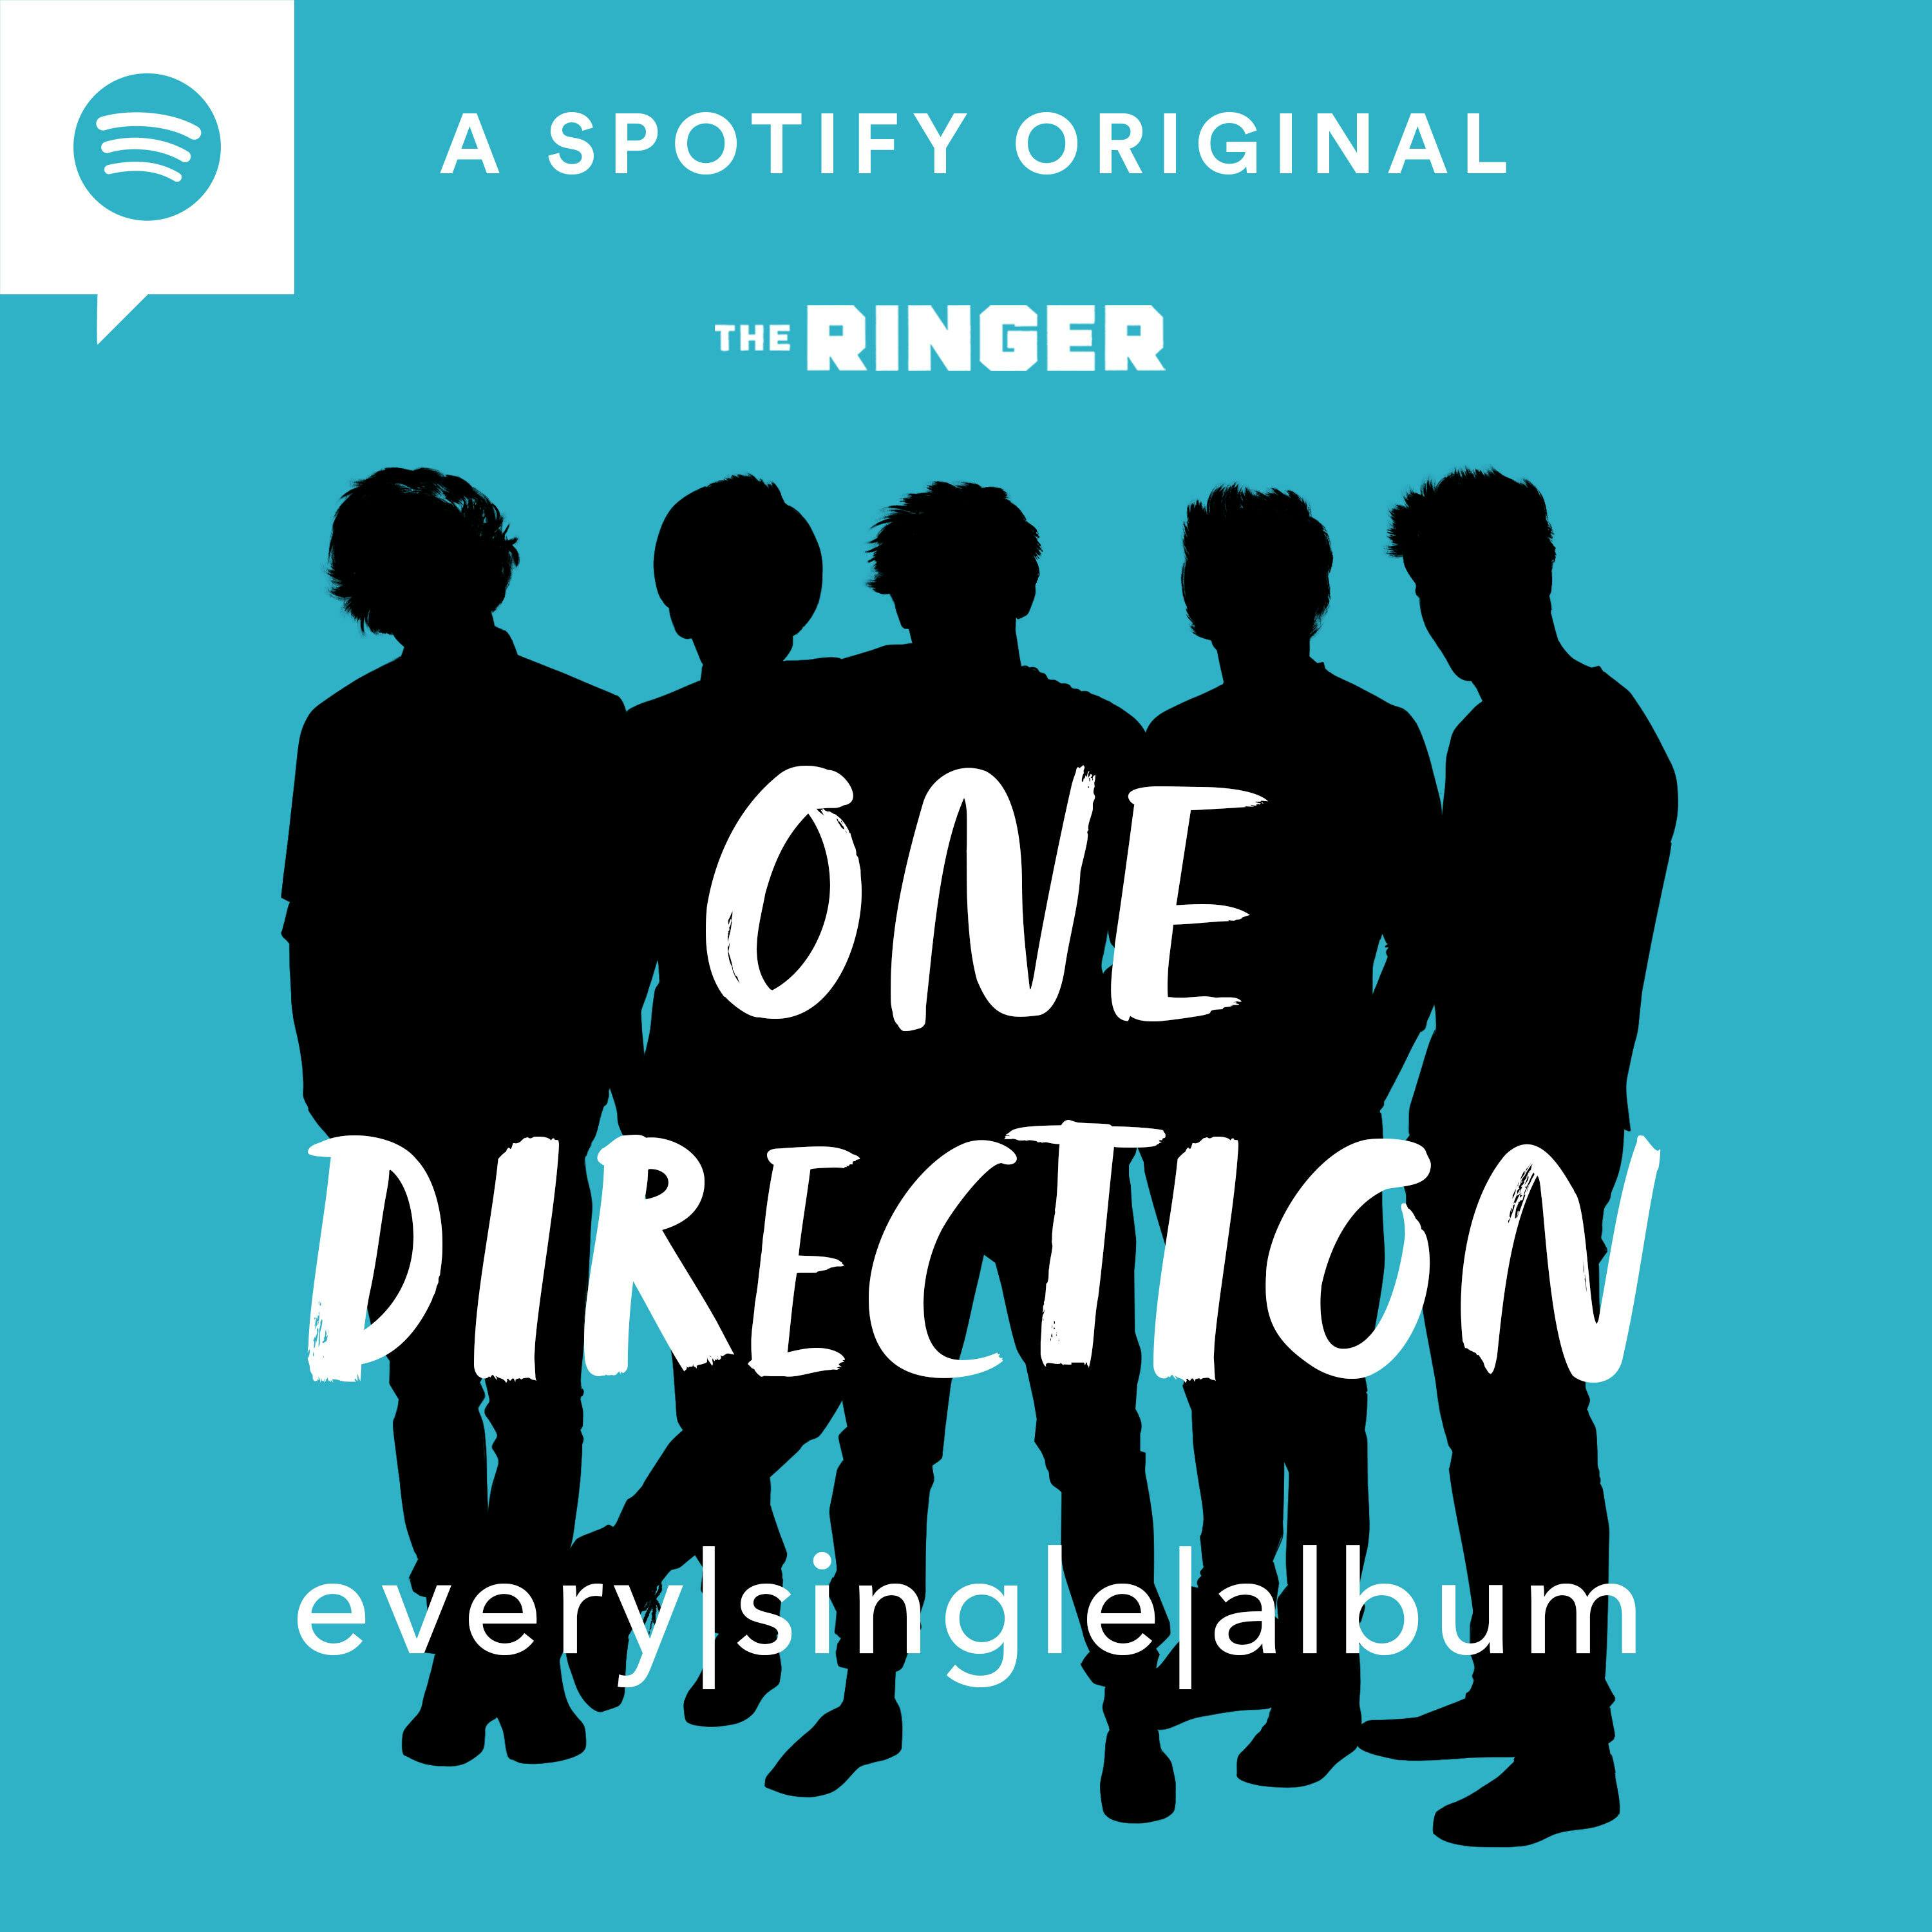 ‘Four’ | Every Single Album: One Direction